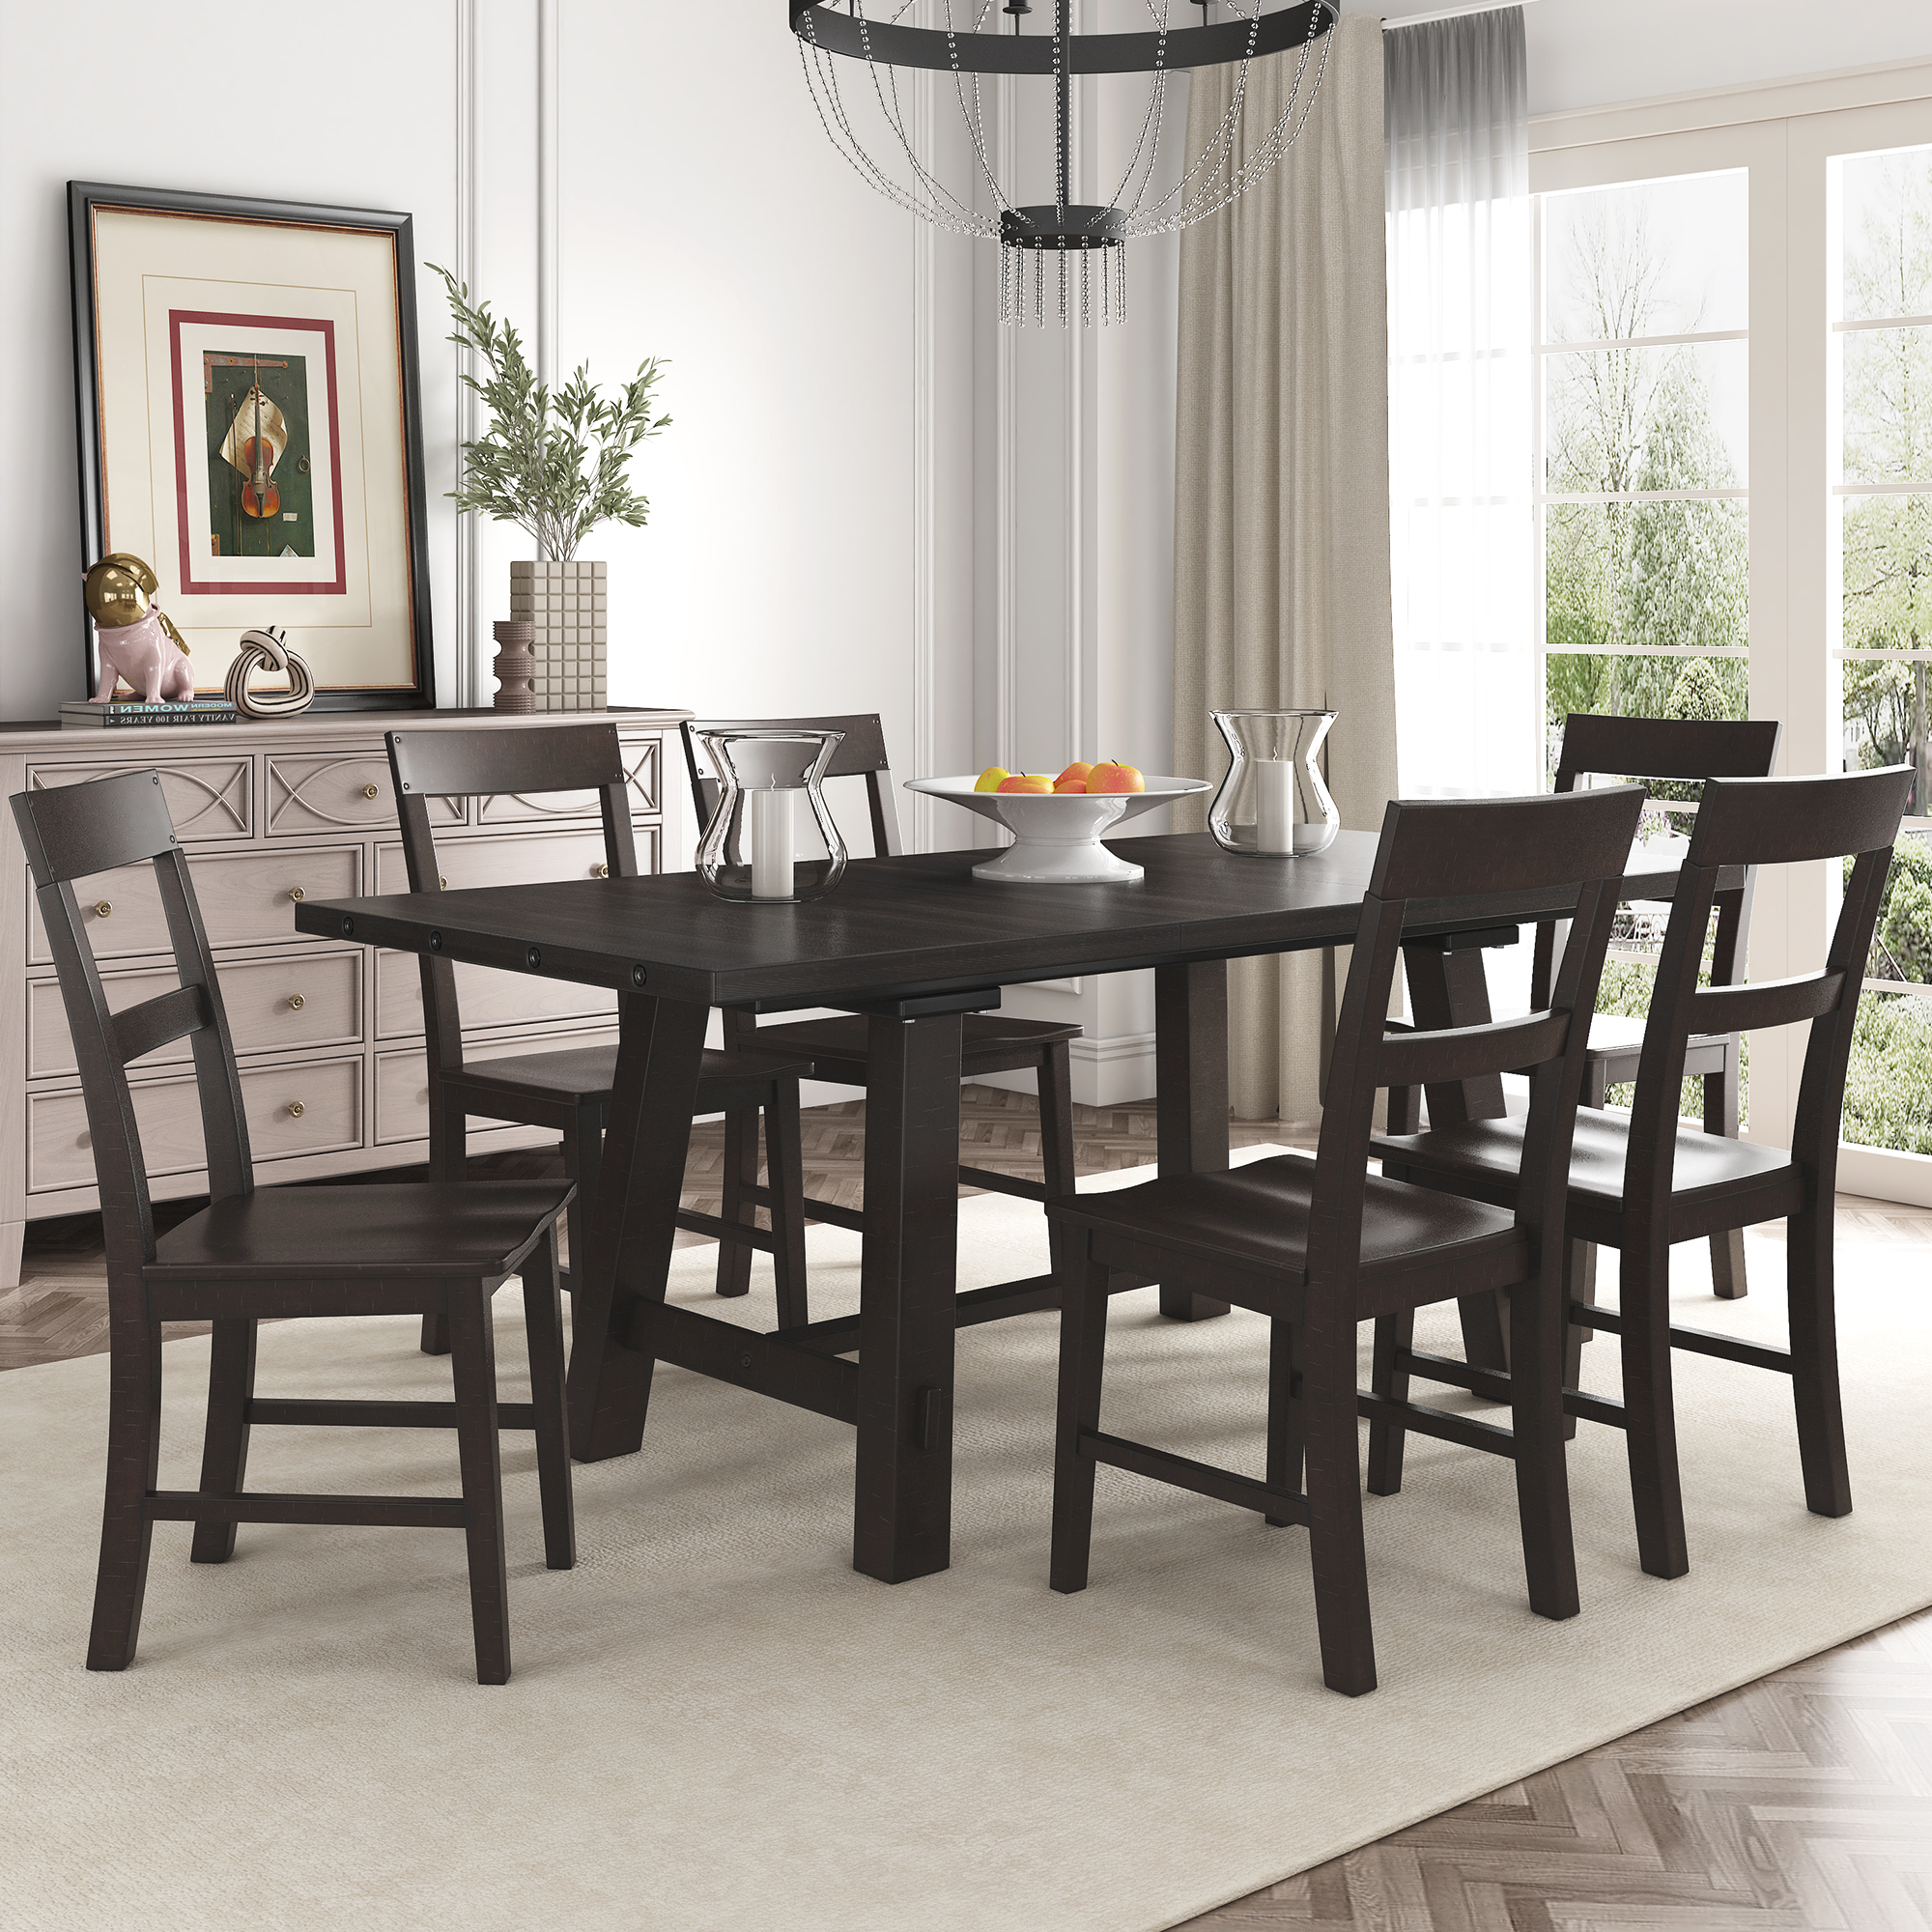 Retro Industrial Style 7-Piece Dining Table Set - ST000071AAP